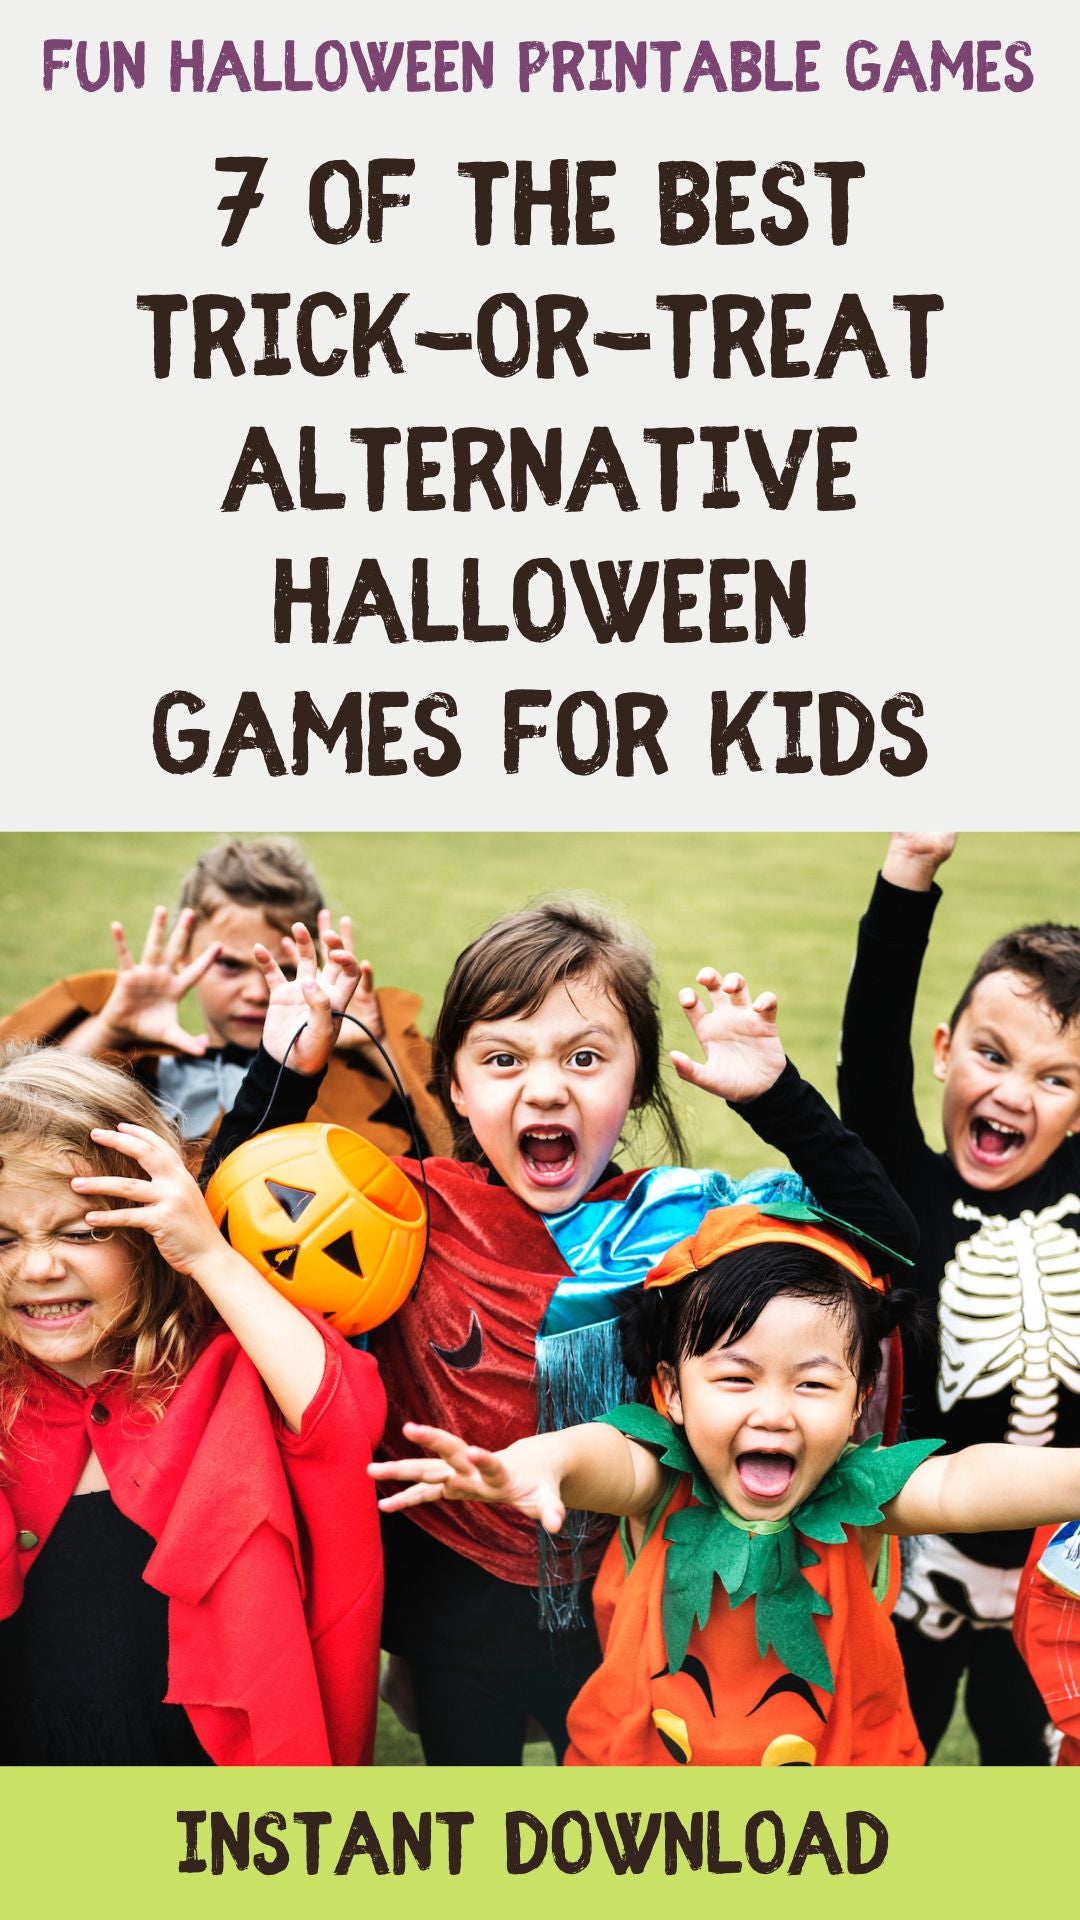 7 of the Best Trick-or-Treat Alternative Halloween Games for Kids ...